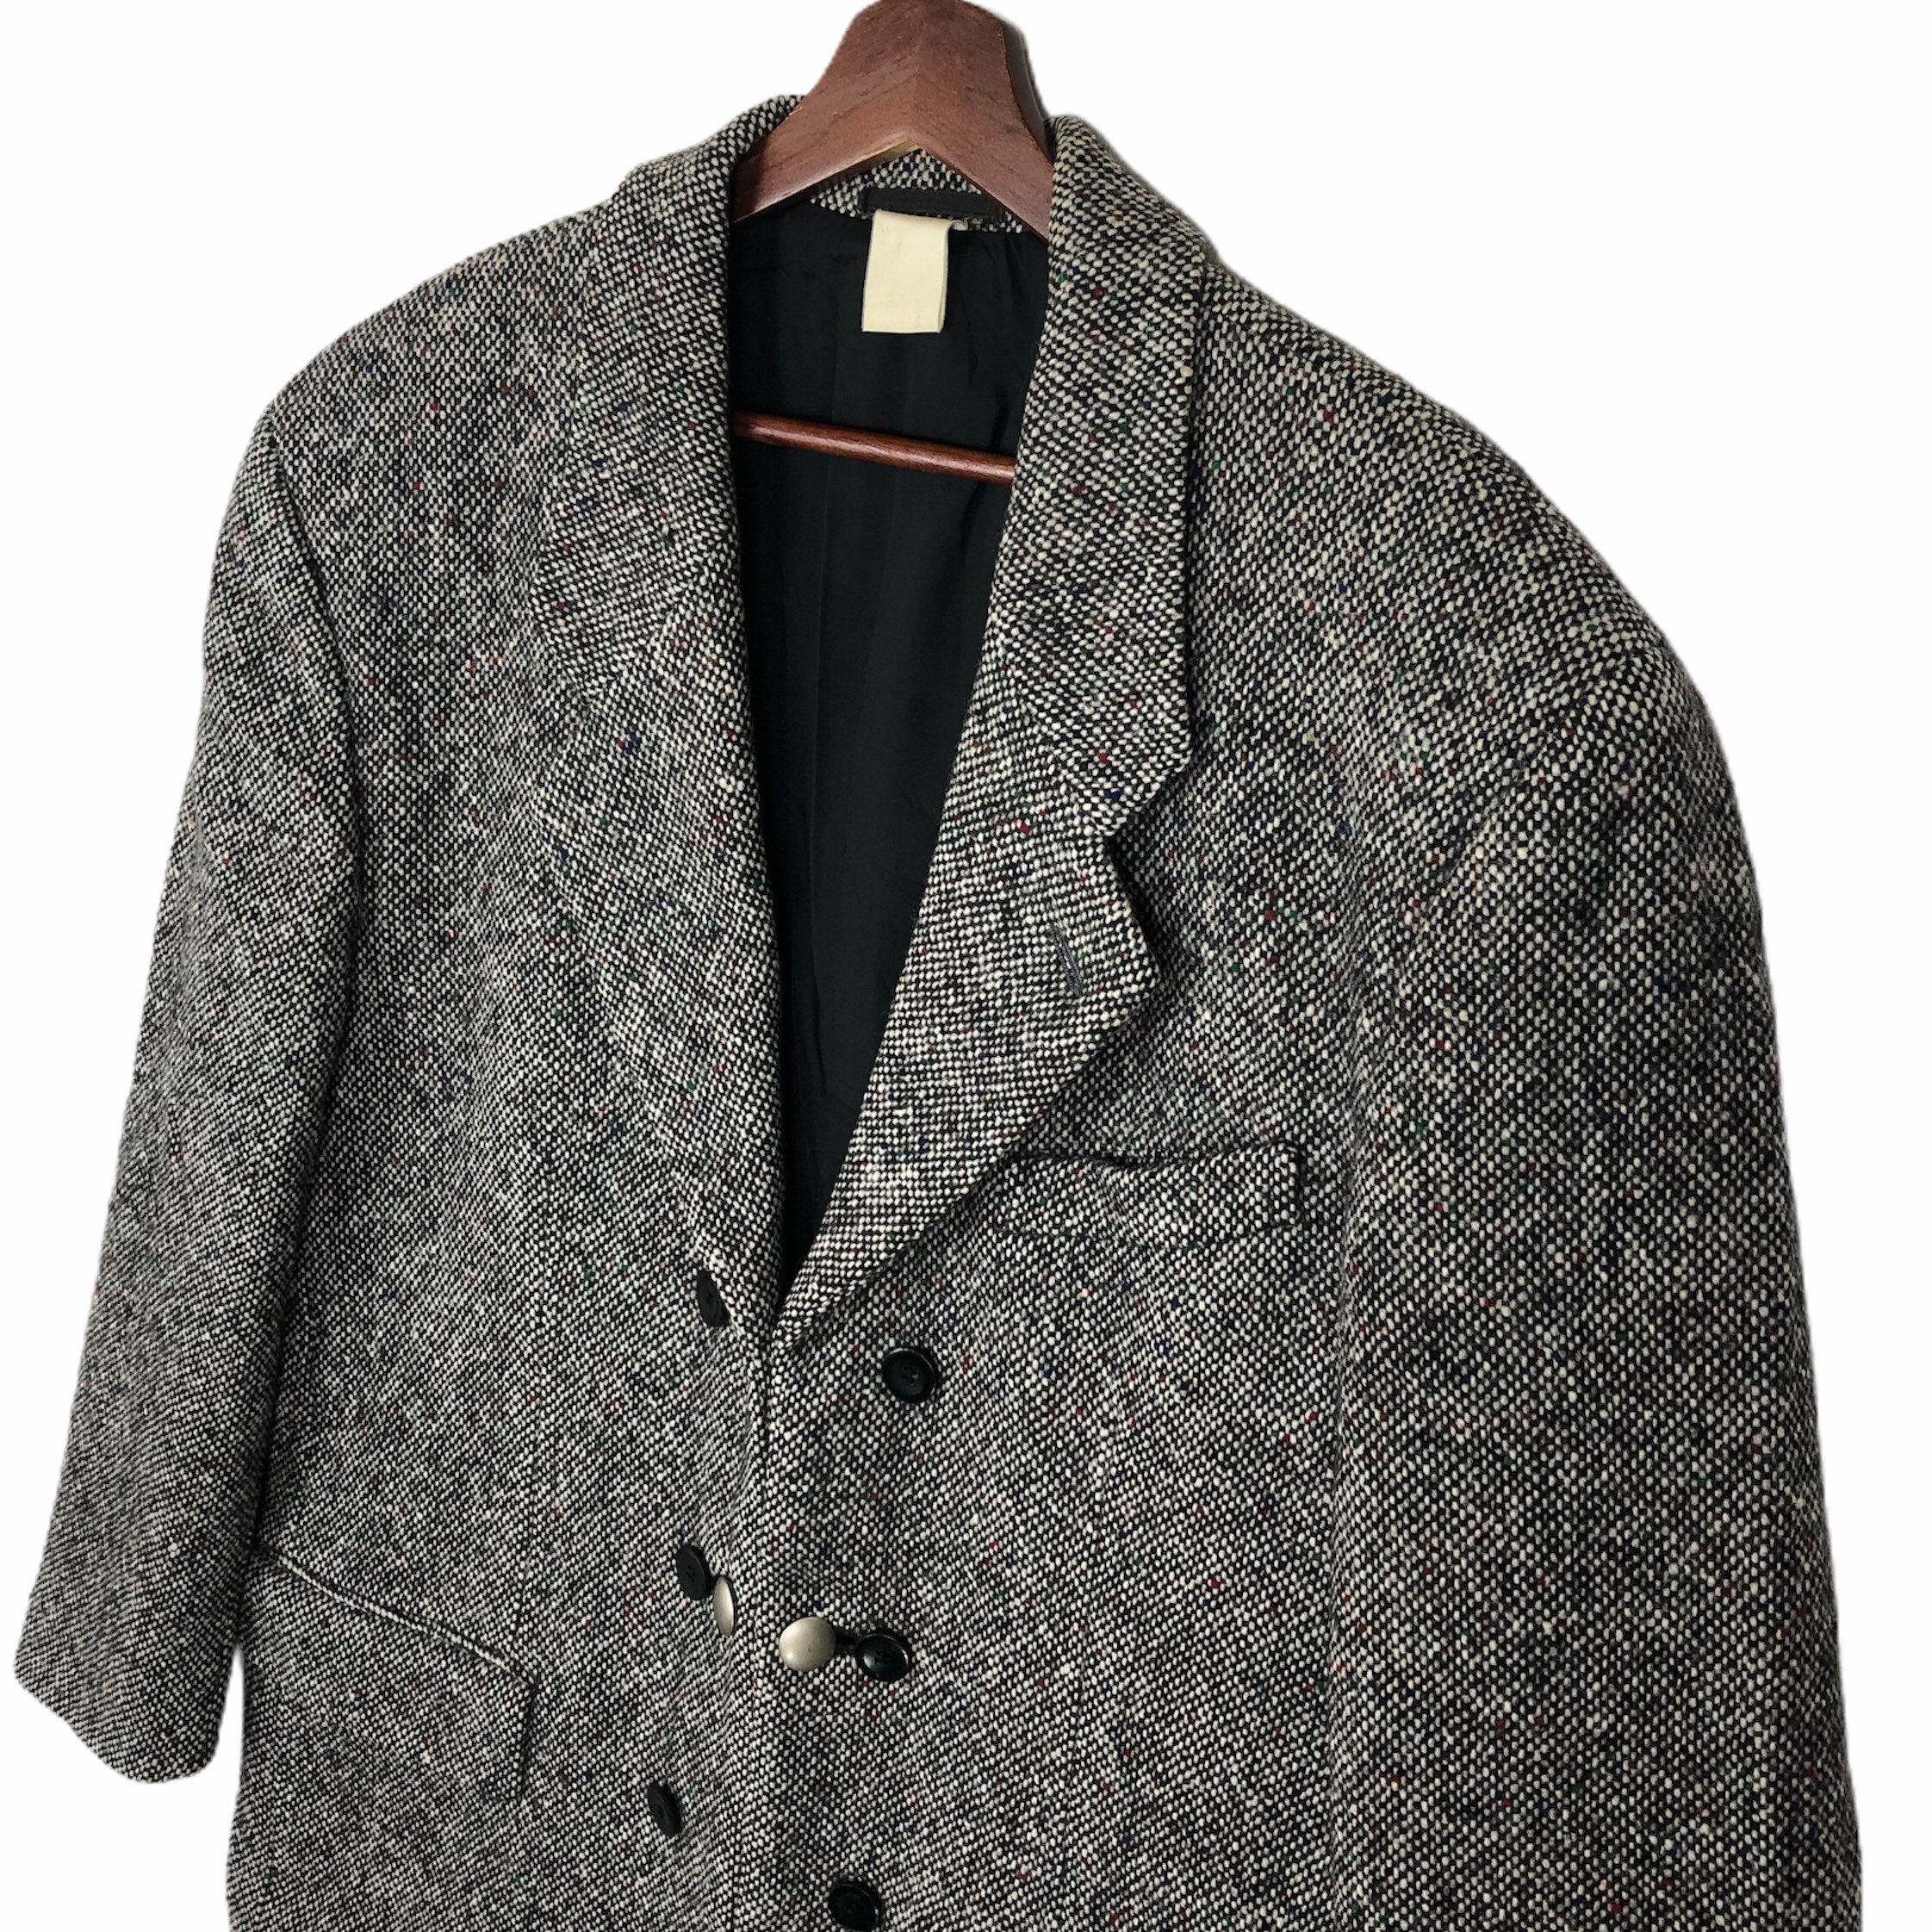 Vintage AW1988 Comme Des Garcons Homme Plus Tweed Jacket by Rei